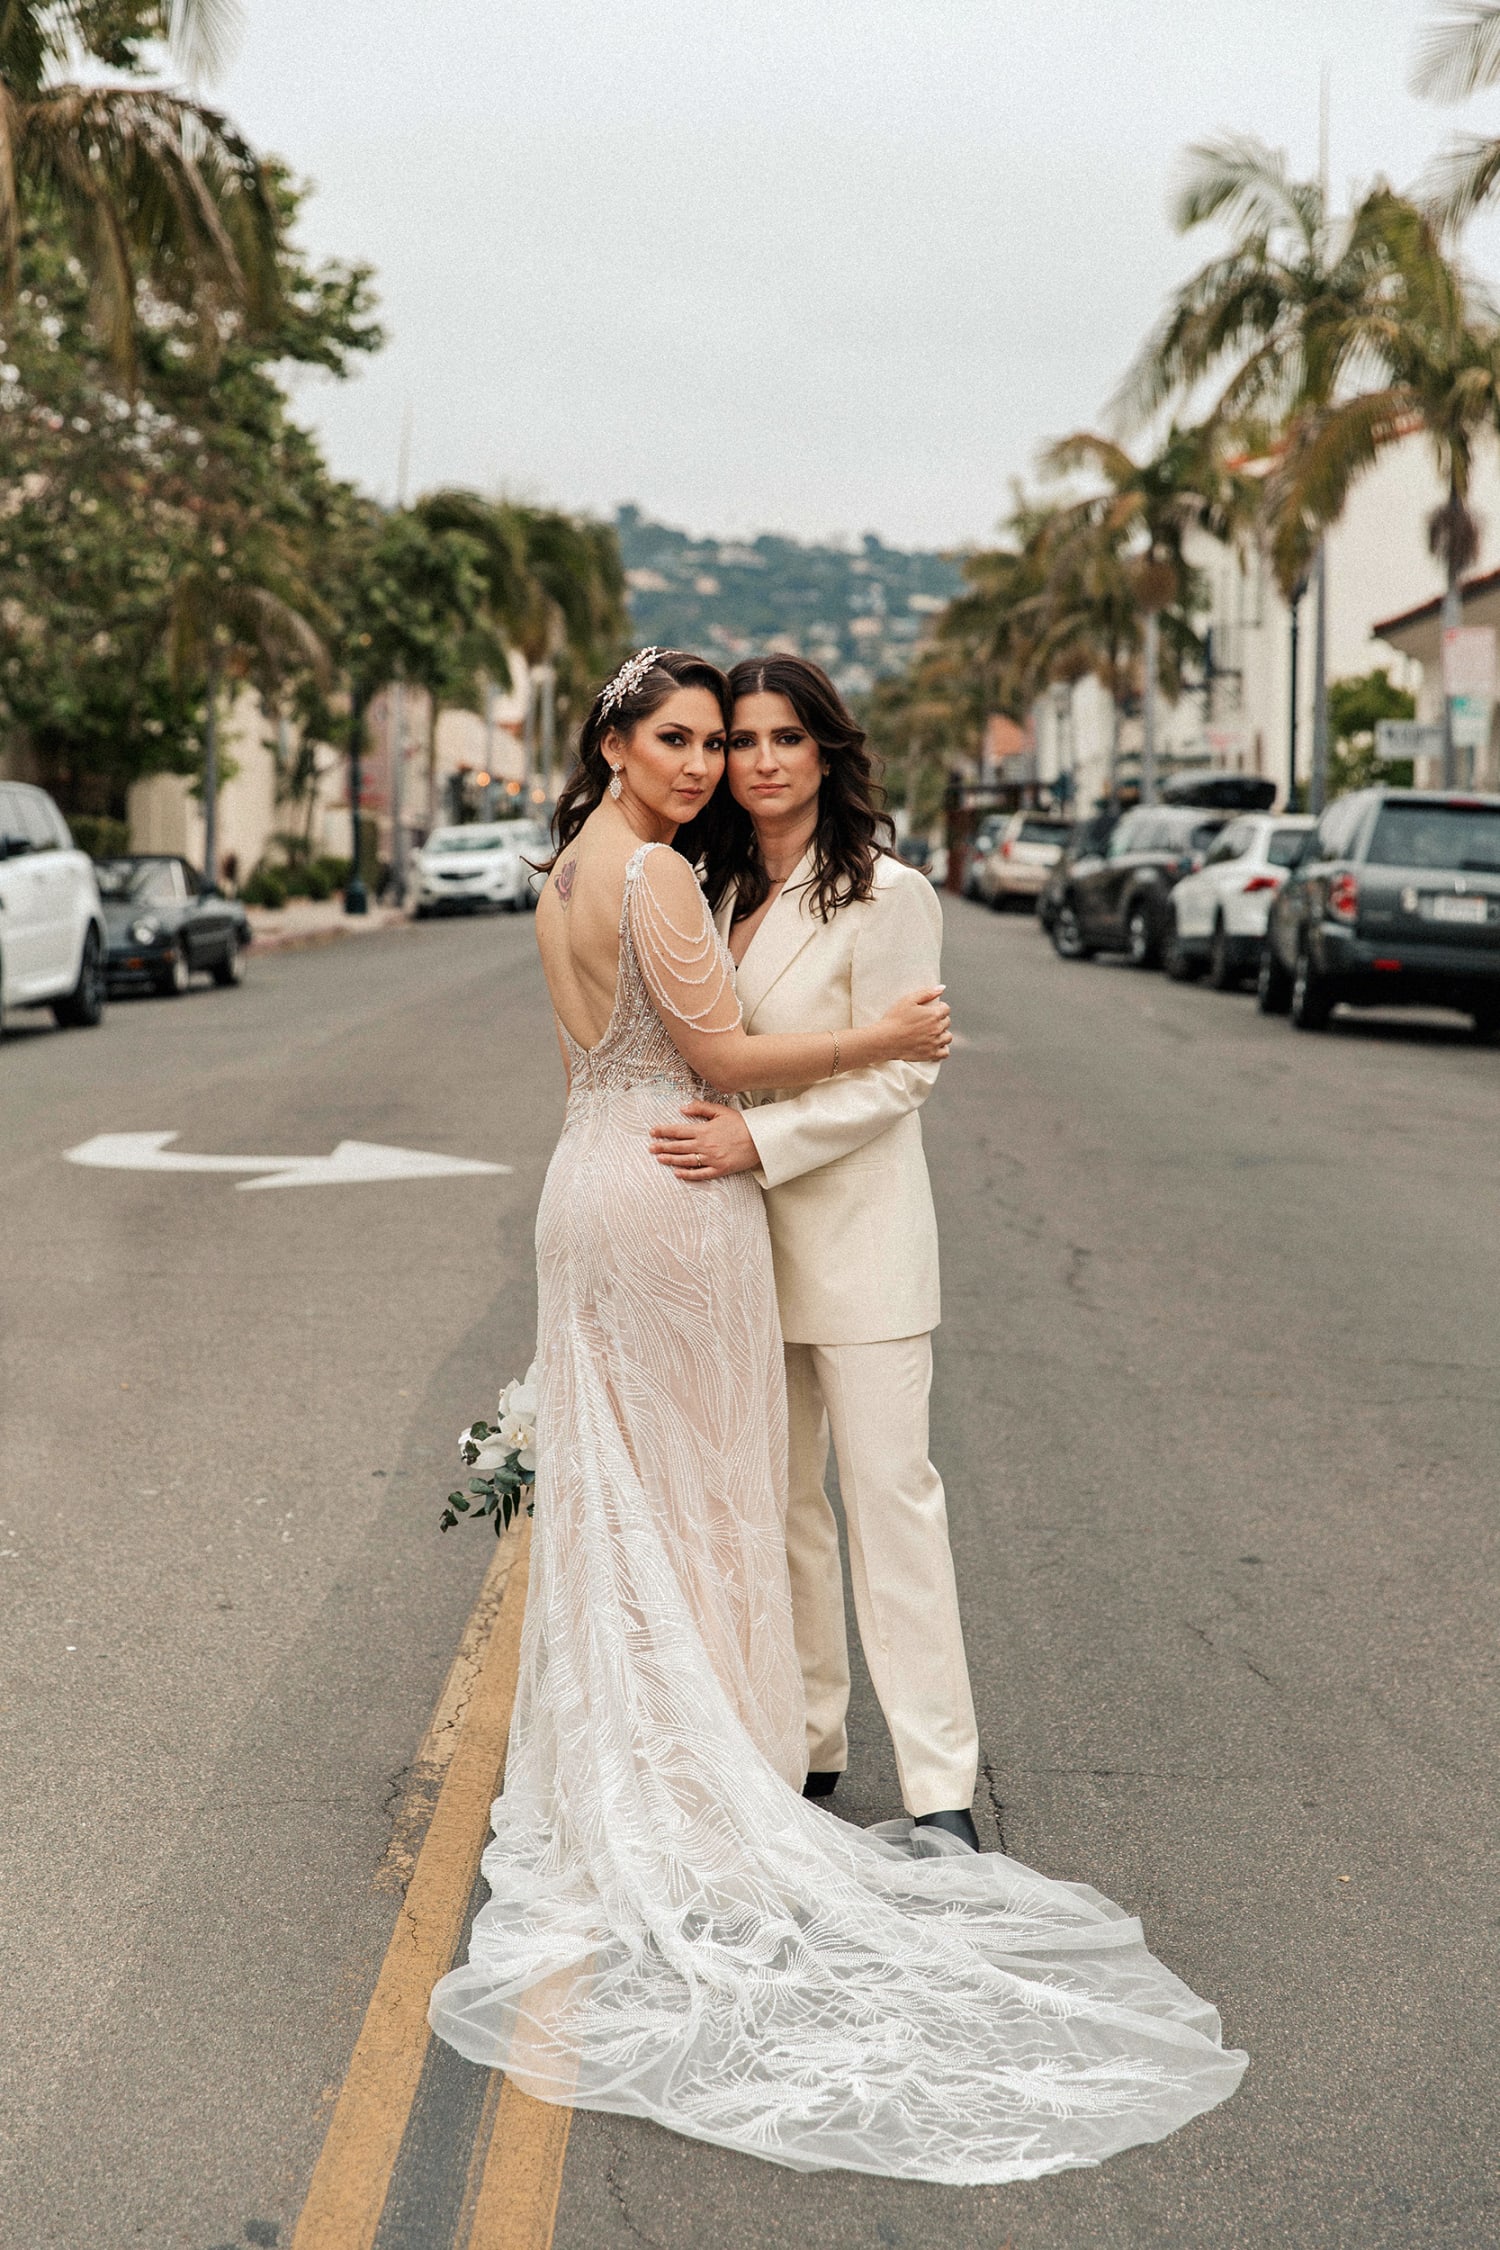 The Hurdles of Getting Married as a Same-Sex Couple — Yes, Still